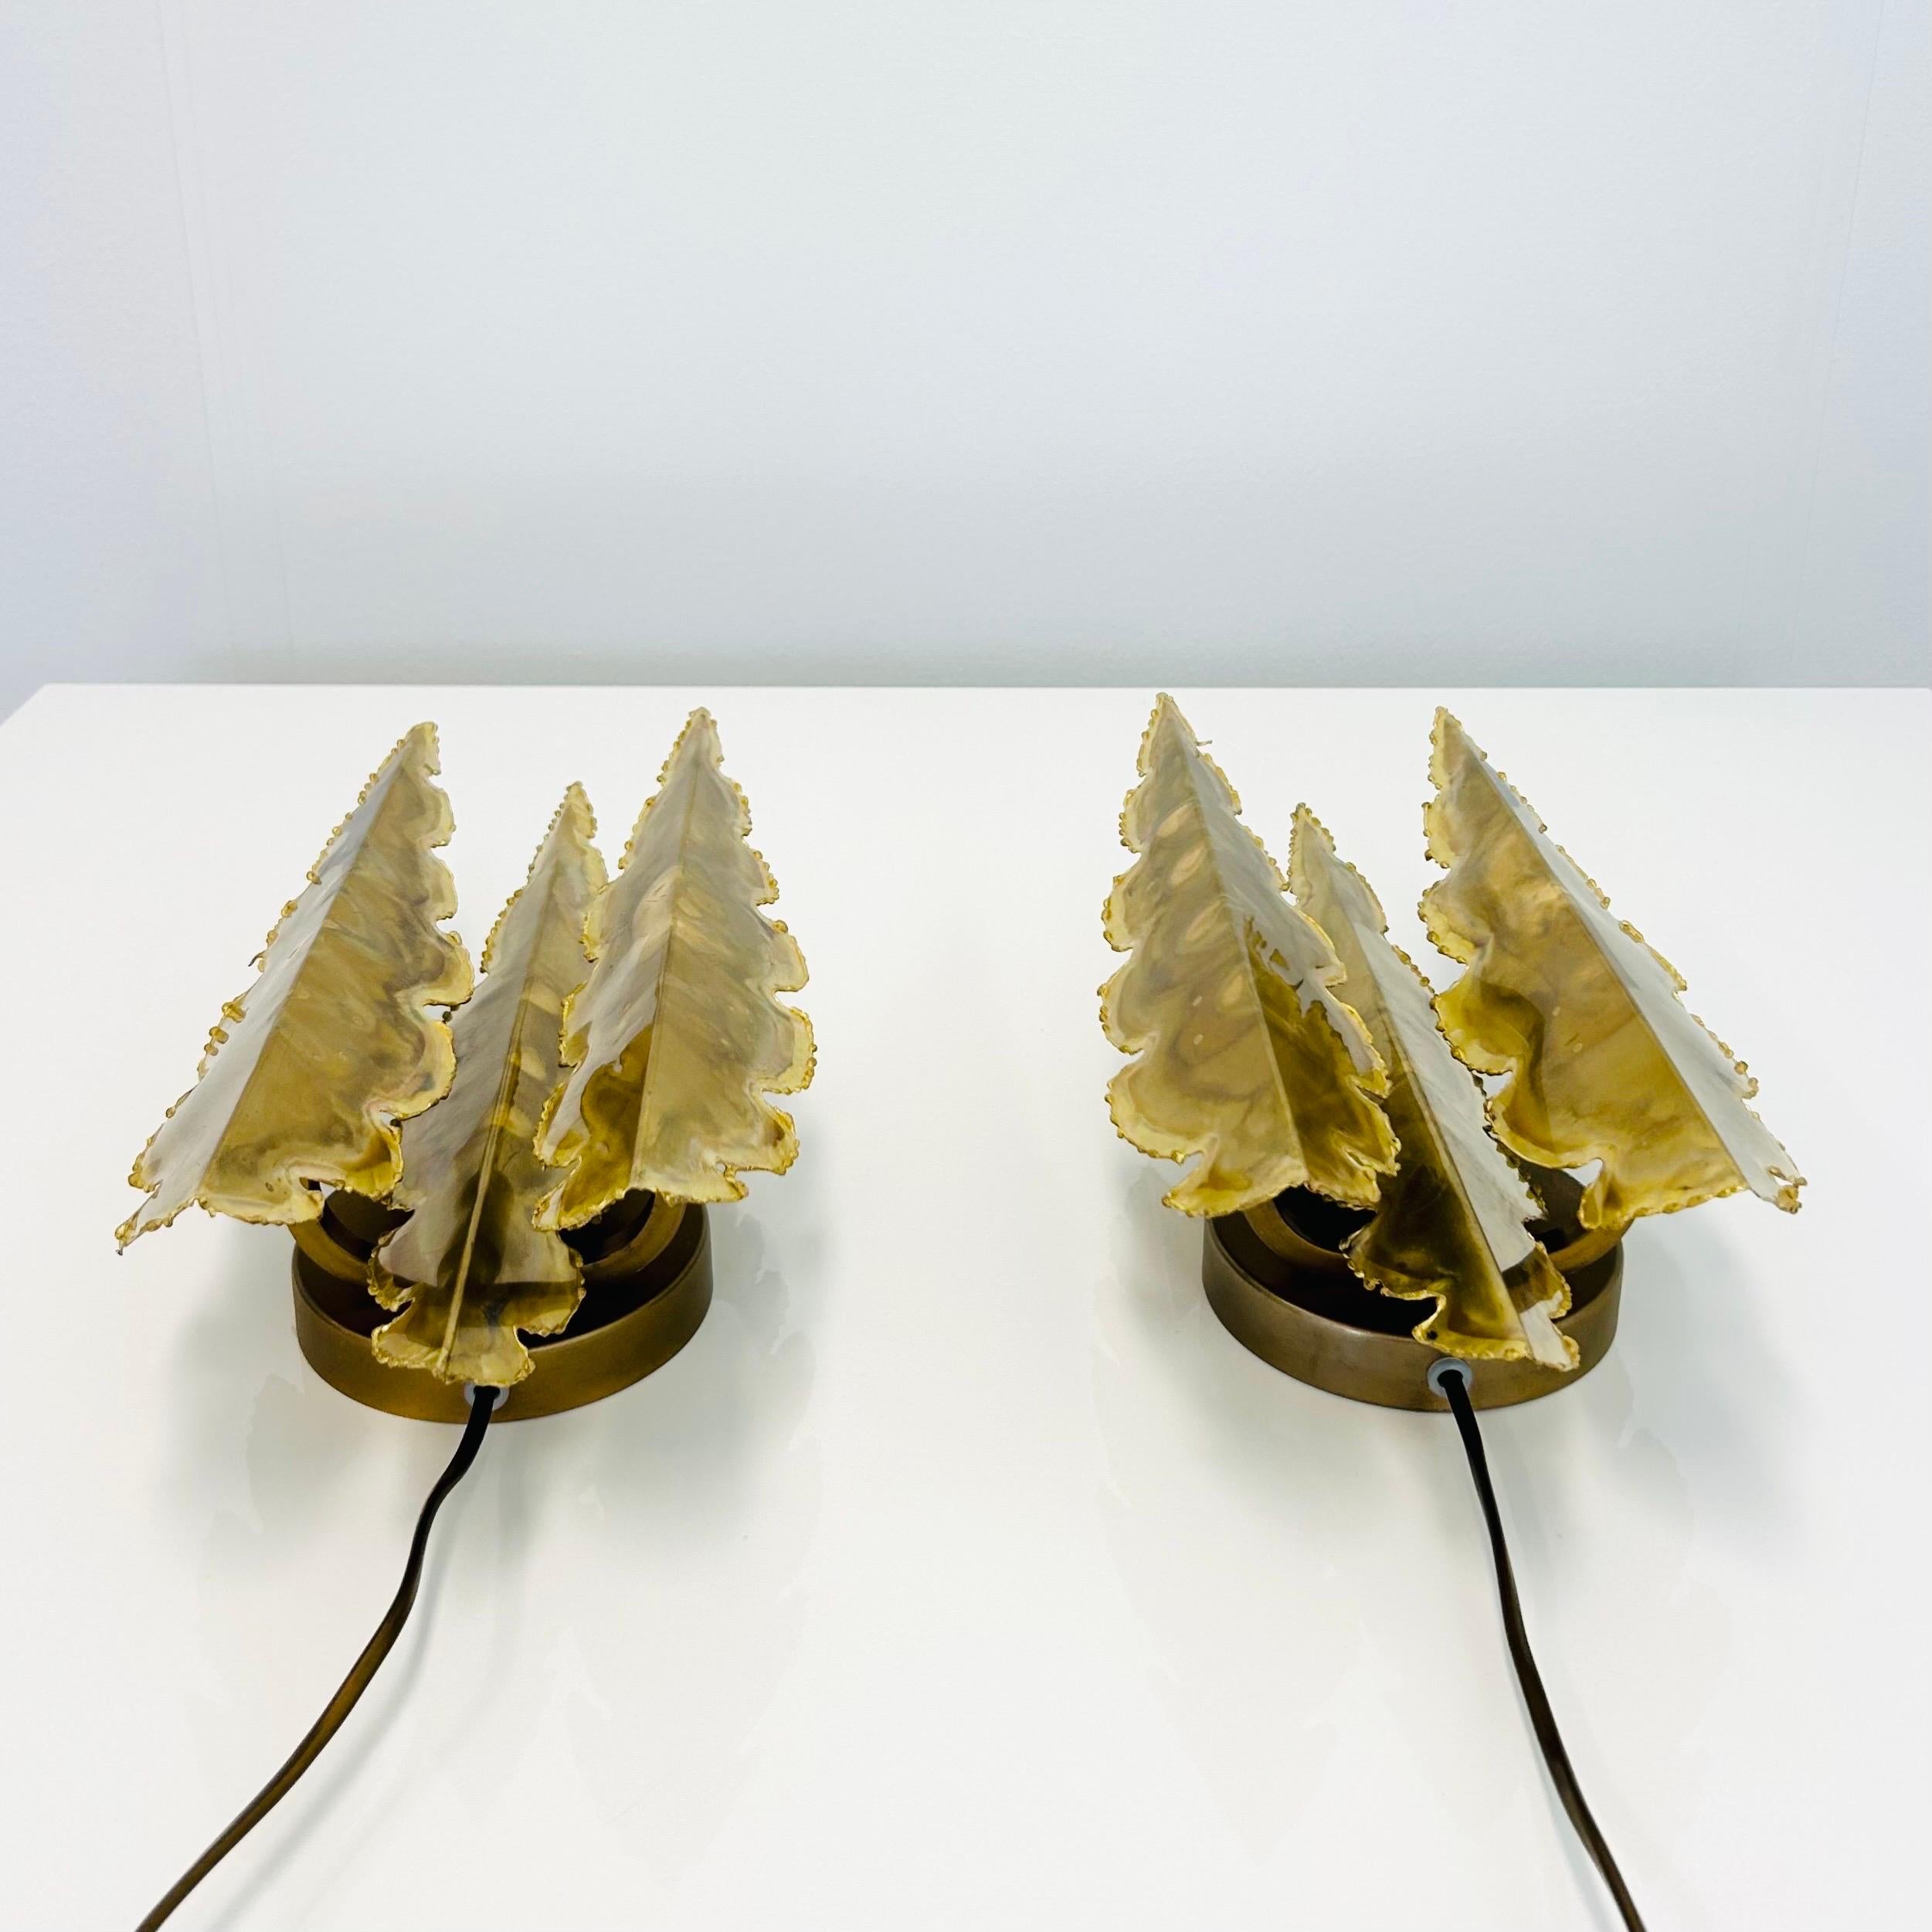 Mid-20th Century Pair of Leaf-Shaped Brass Wall Lamps by Svend Aage Holm Sorensen, 1960s, Denmark For Sale